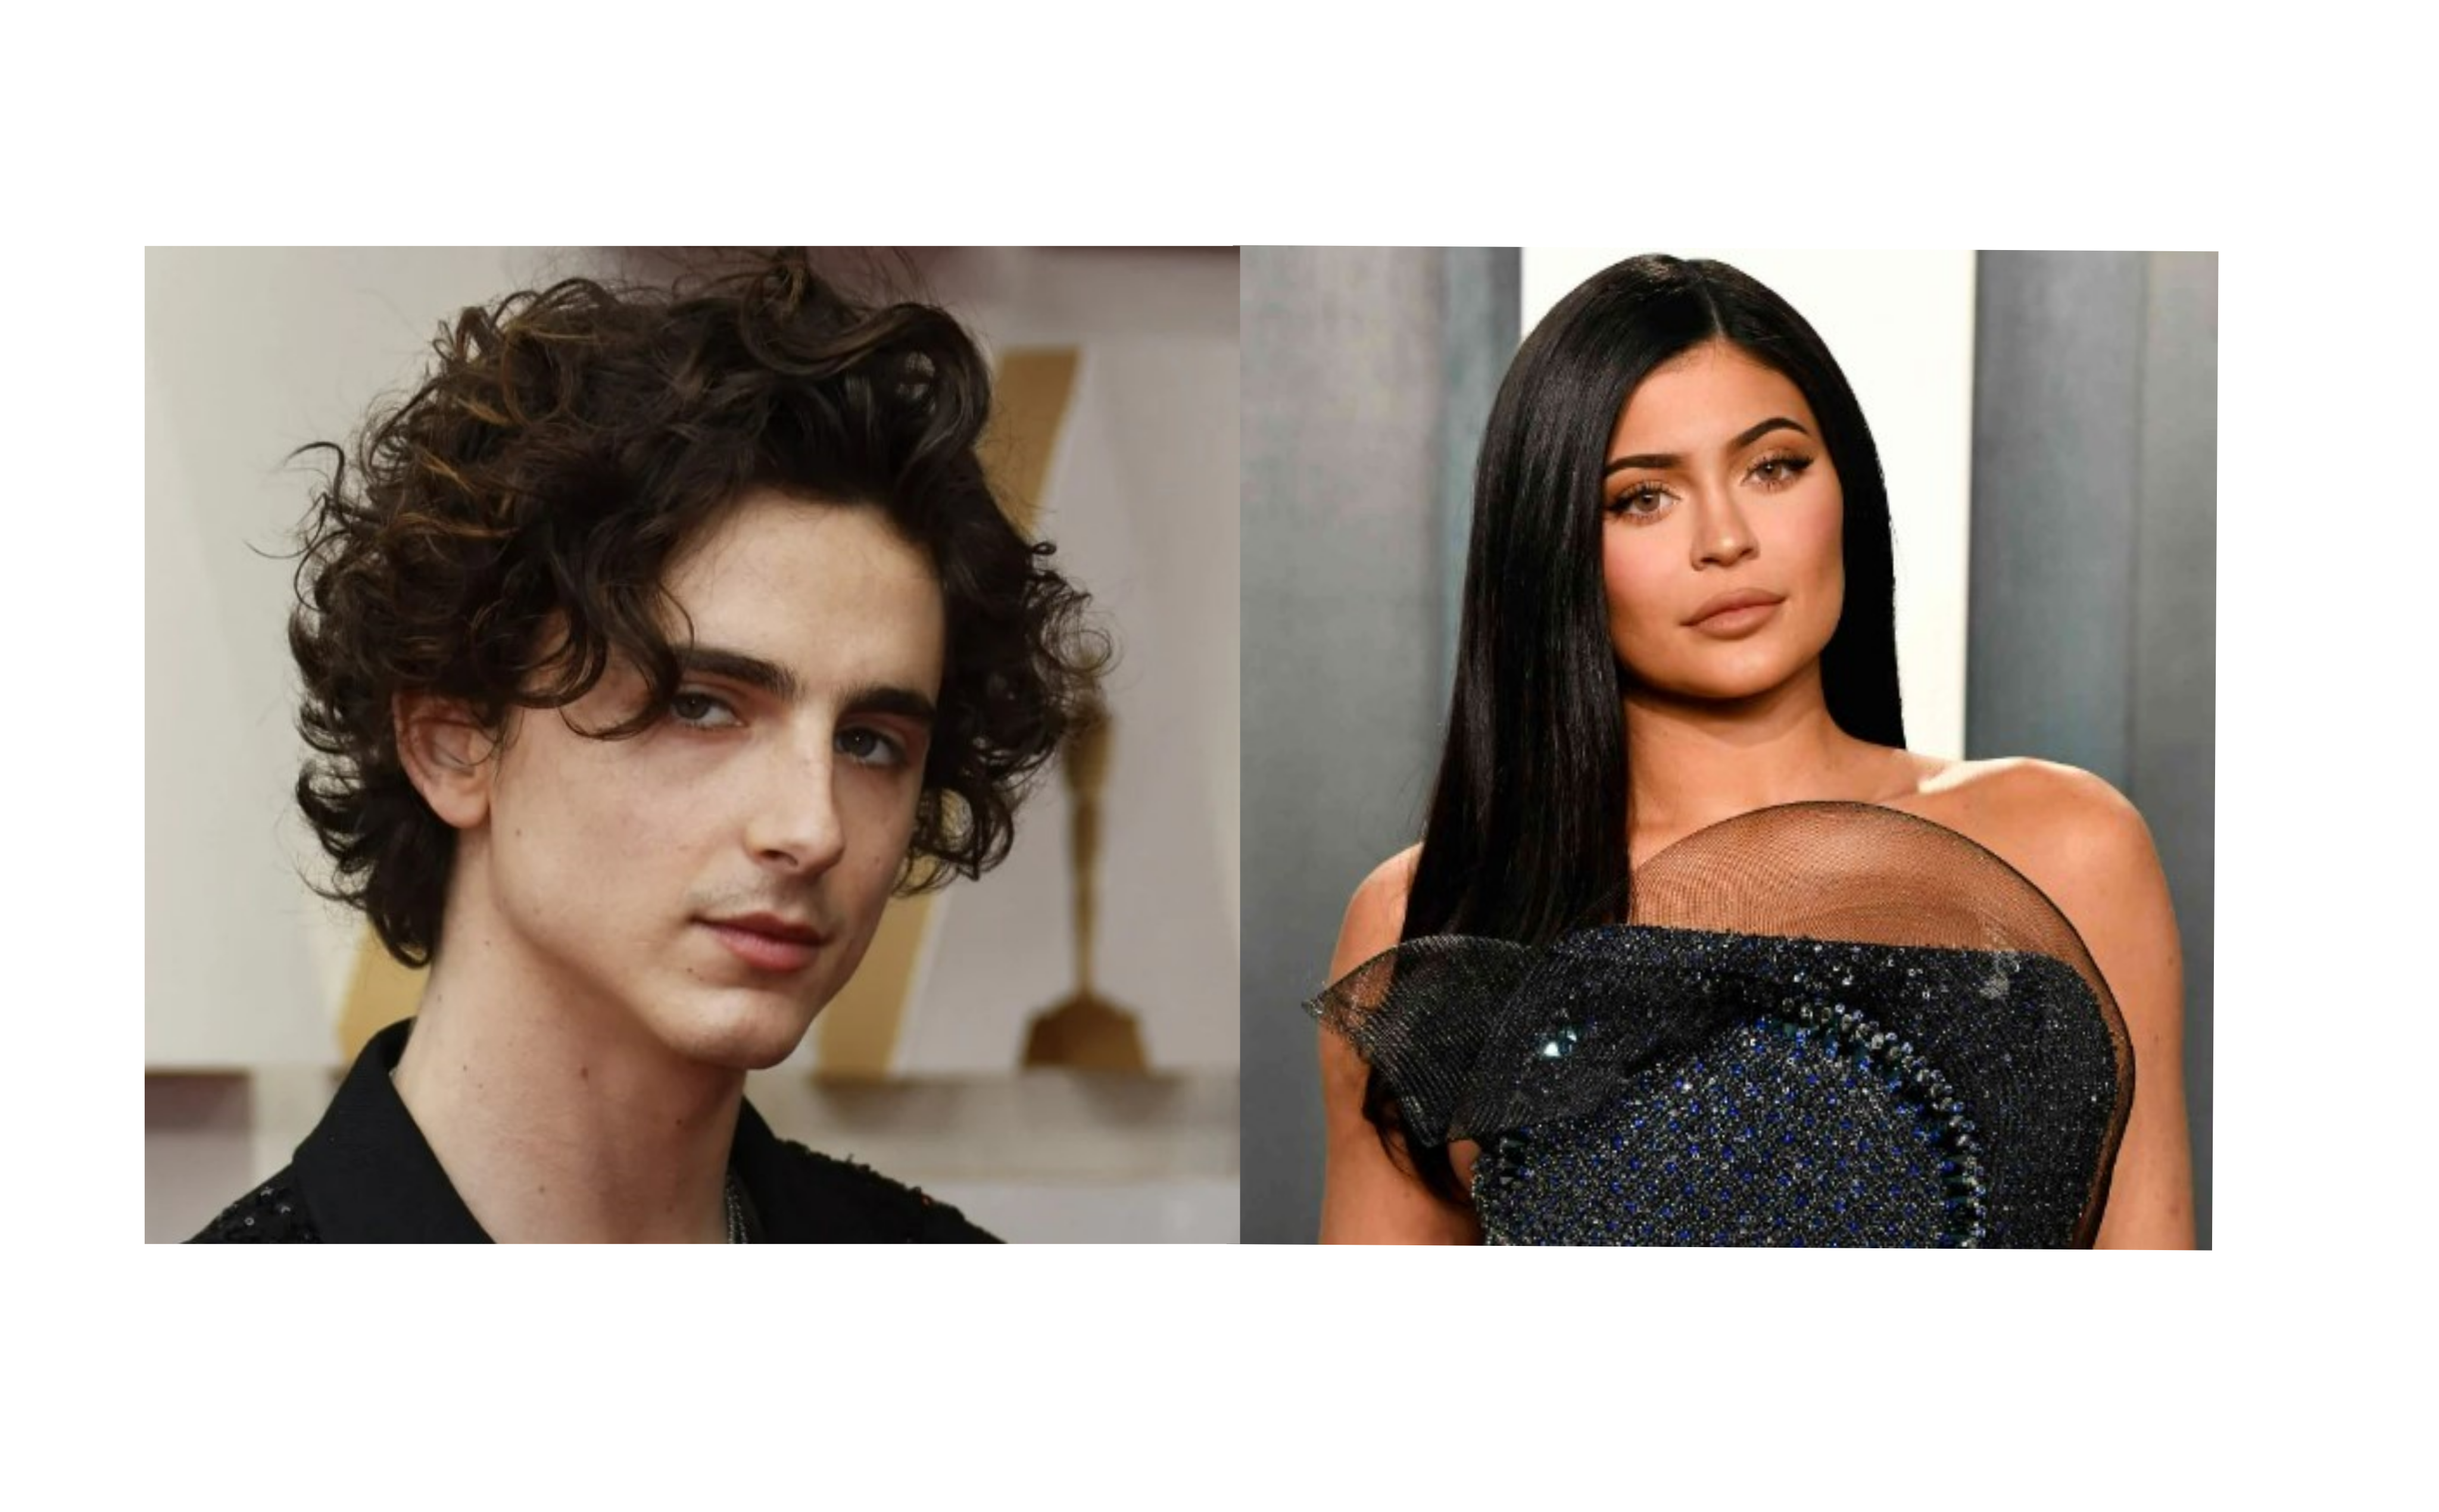 Are Kylie Jenner And Timothee Chalamet Dating?